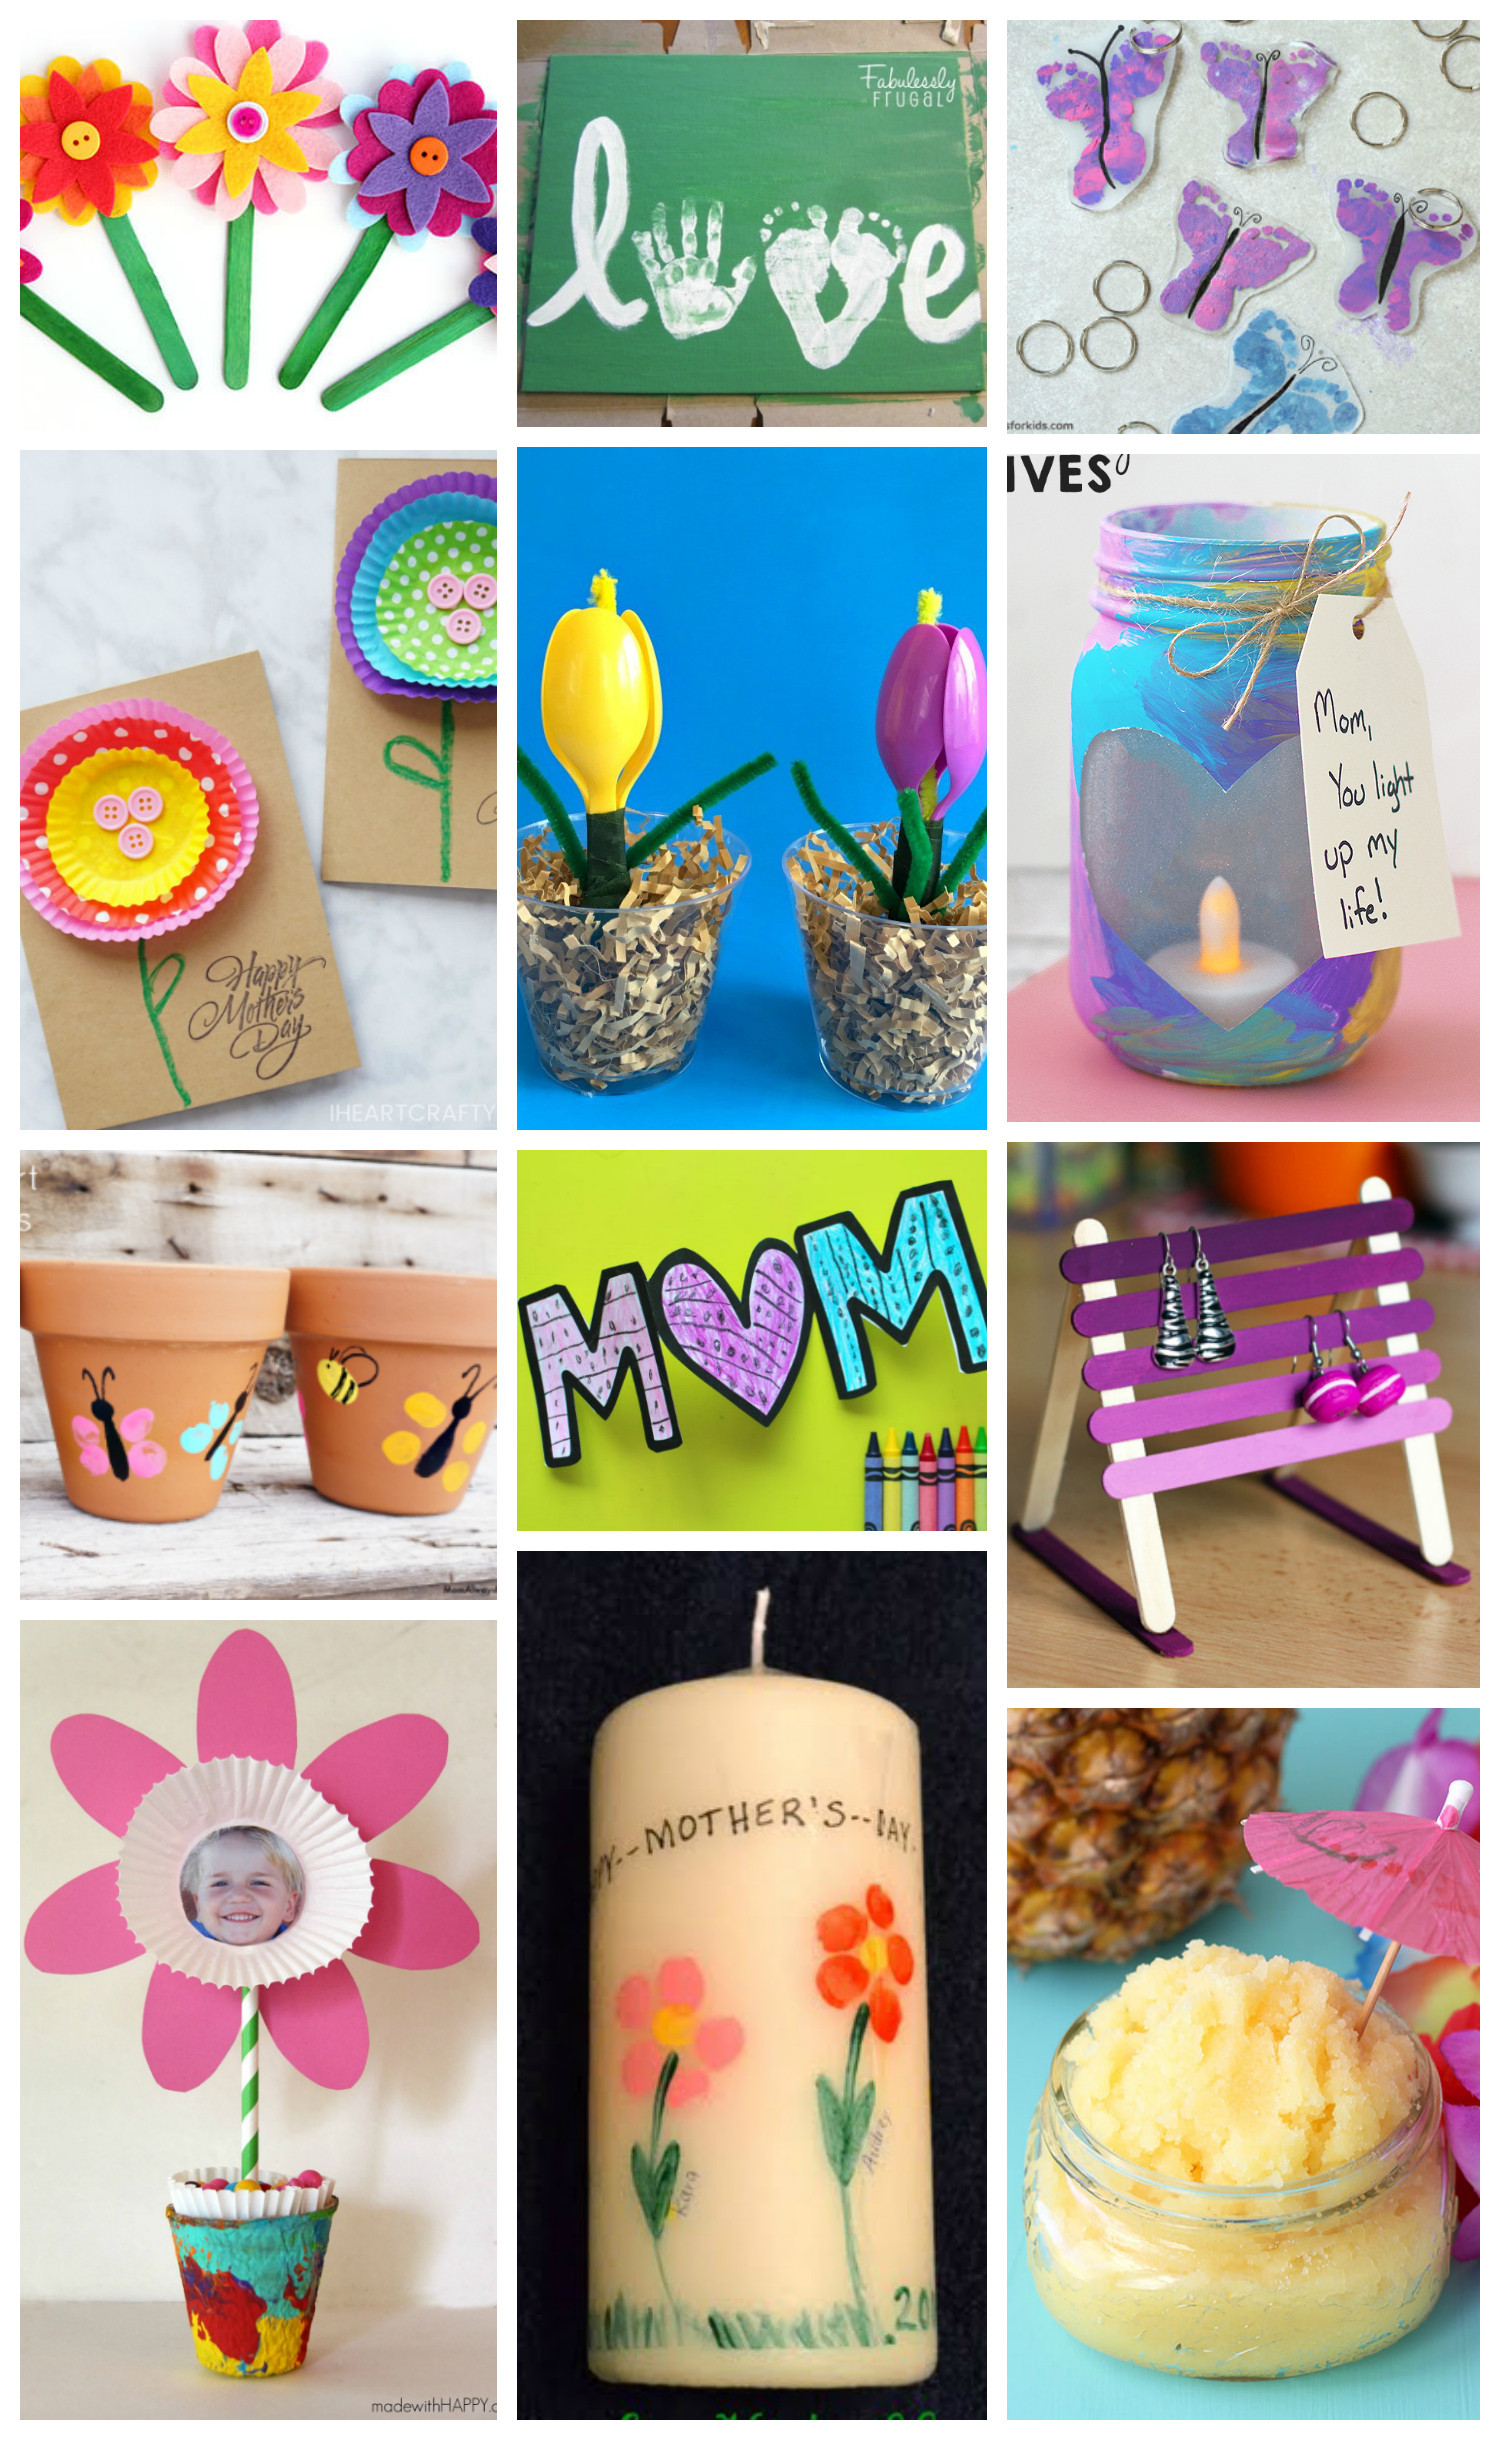 Mother'S Day Gift Ideas For Kids
 Easy Mother s Day Crafts for Kids Happiness is Homemade